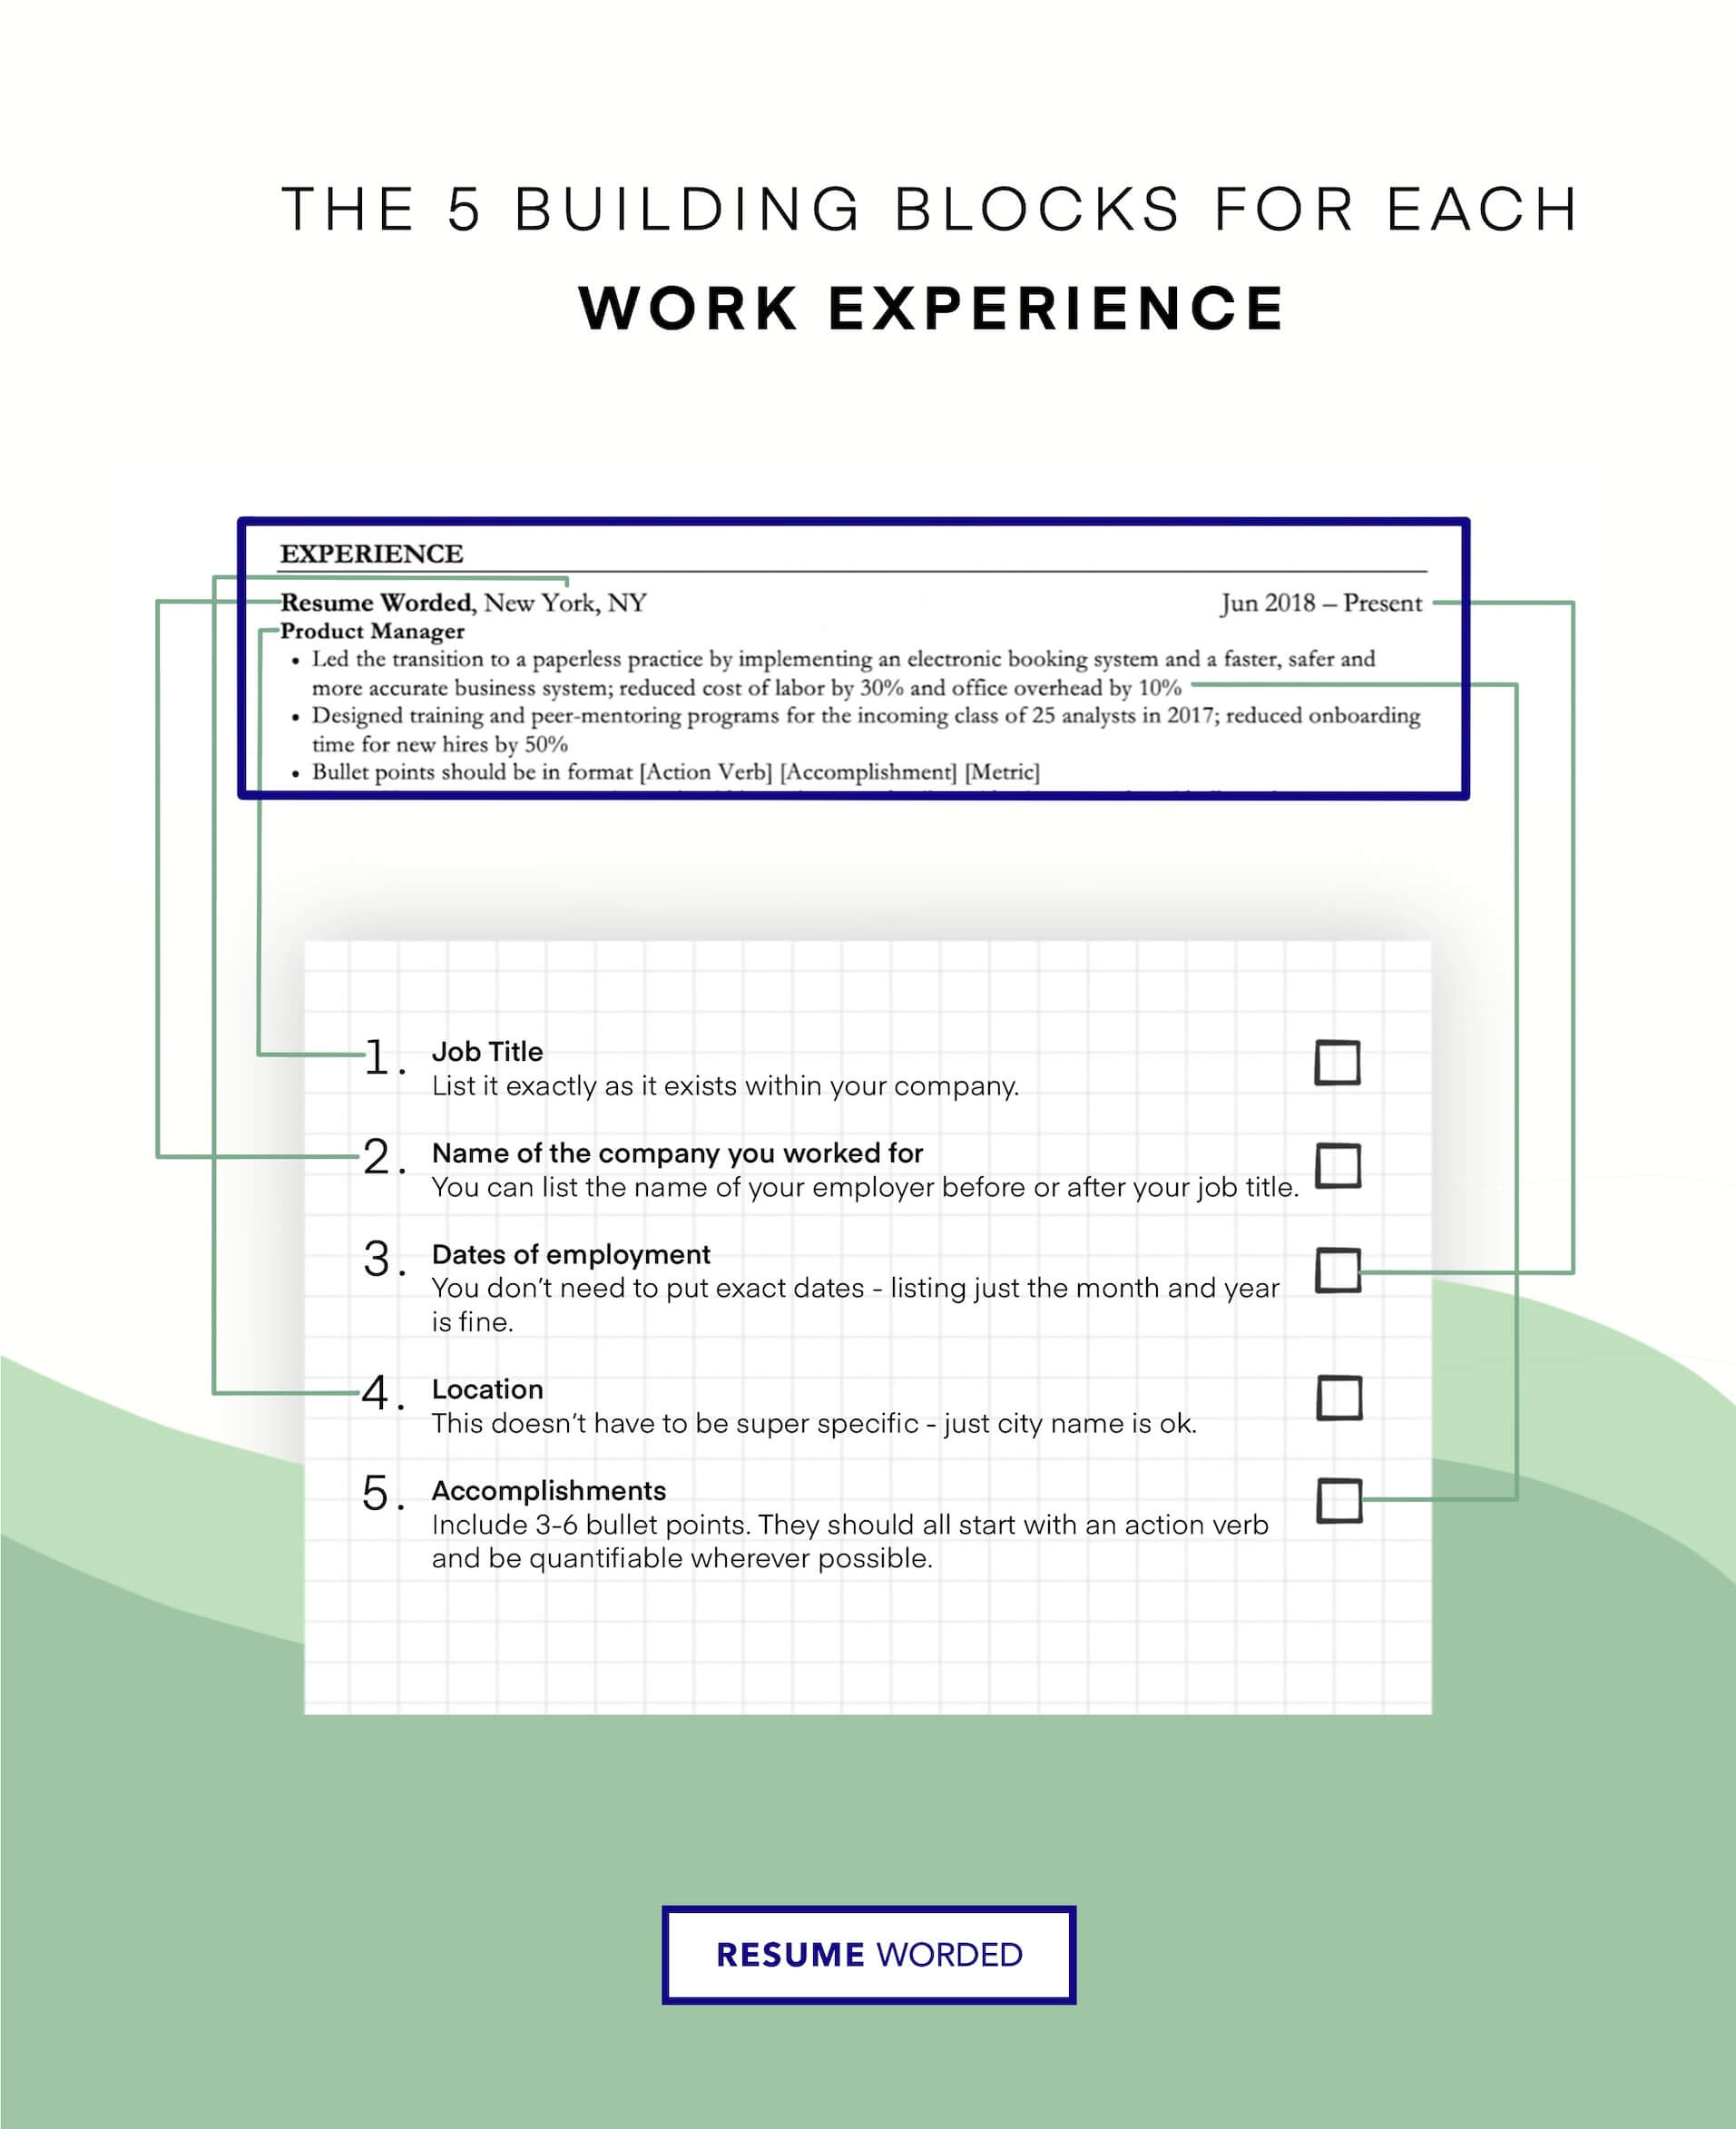 Prioritize work experience, while including other key sections - Modern Two-Column Resume